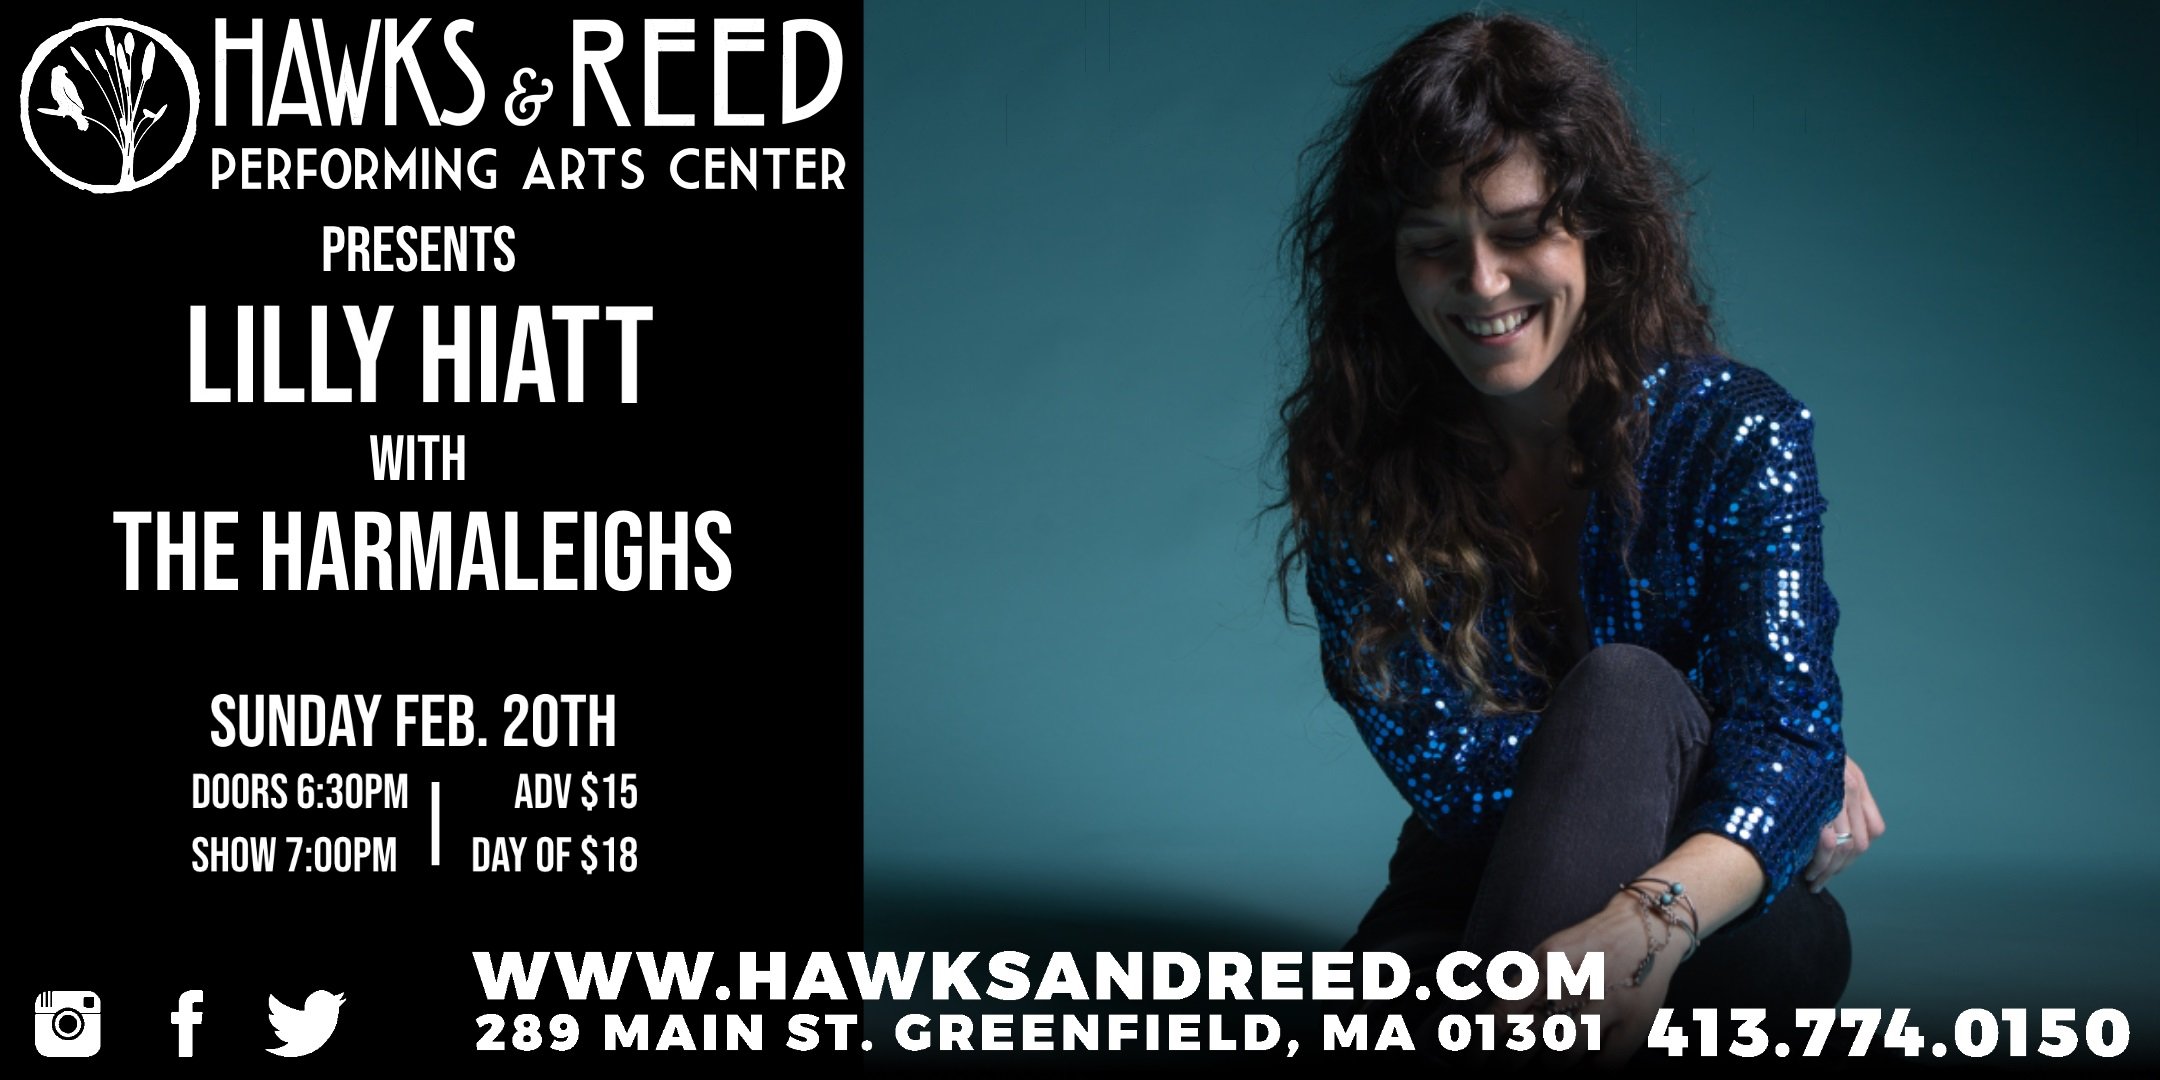 Lilly Hiatt with the Harmaleighs at Hawks & Reed